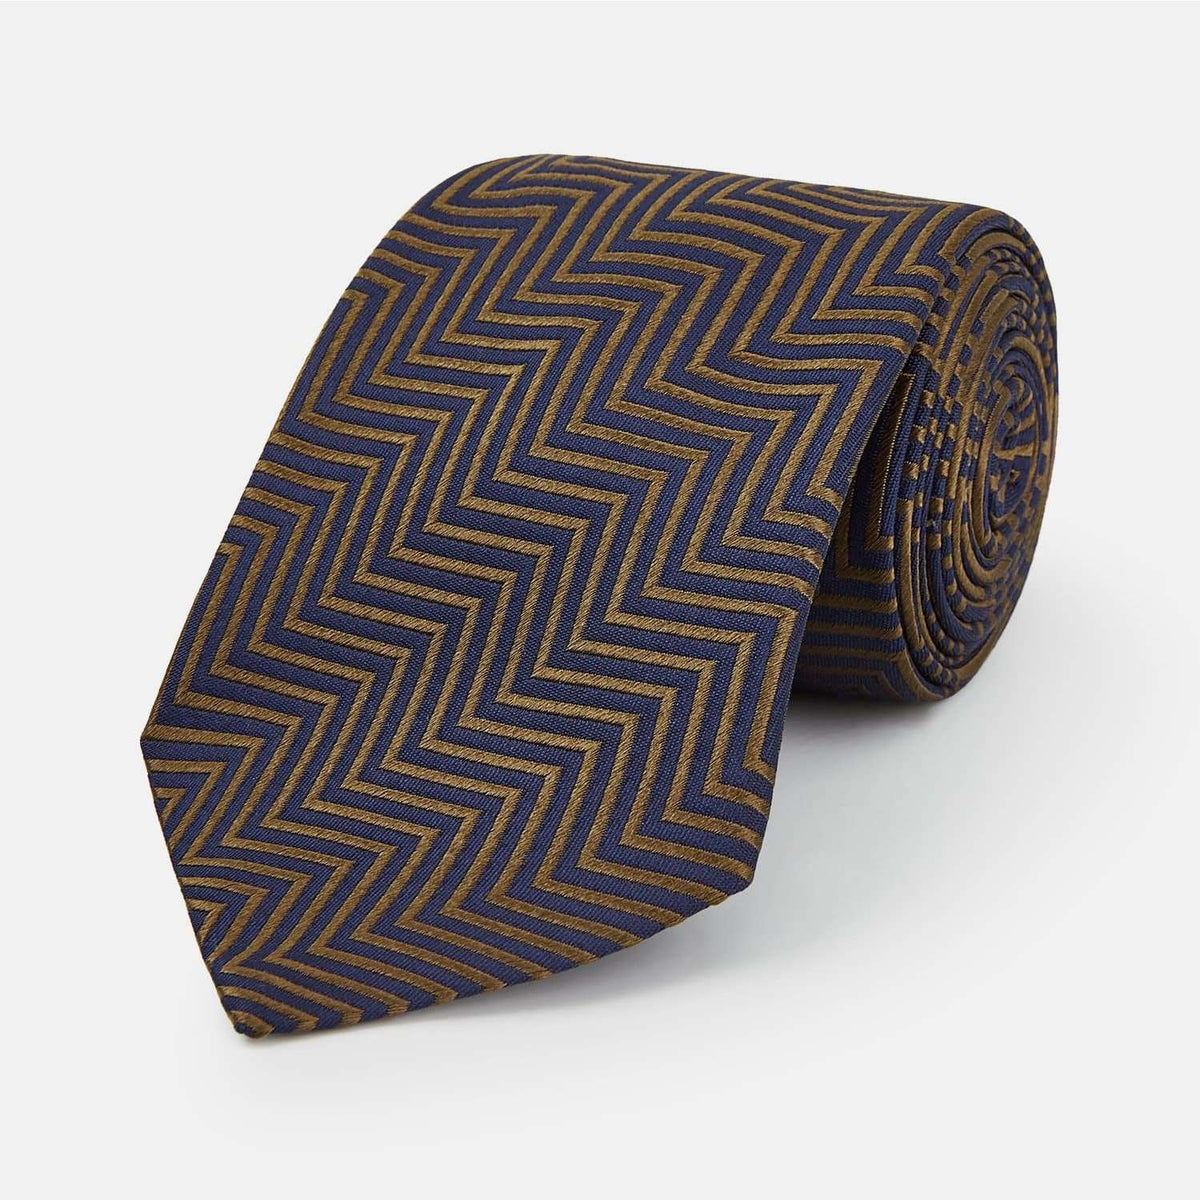 Zig Zag Silk Tie - The World Is Not Enough - By Turnbull &amp; Asser TIE Turnbull &amp; Asser 